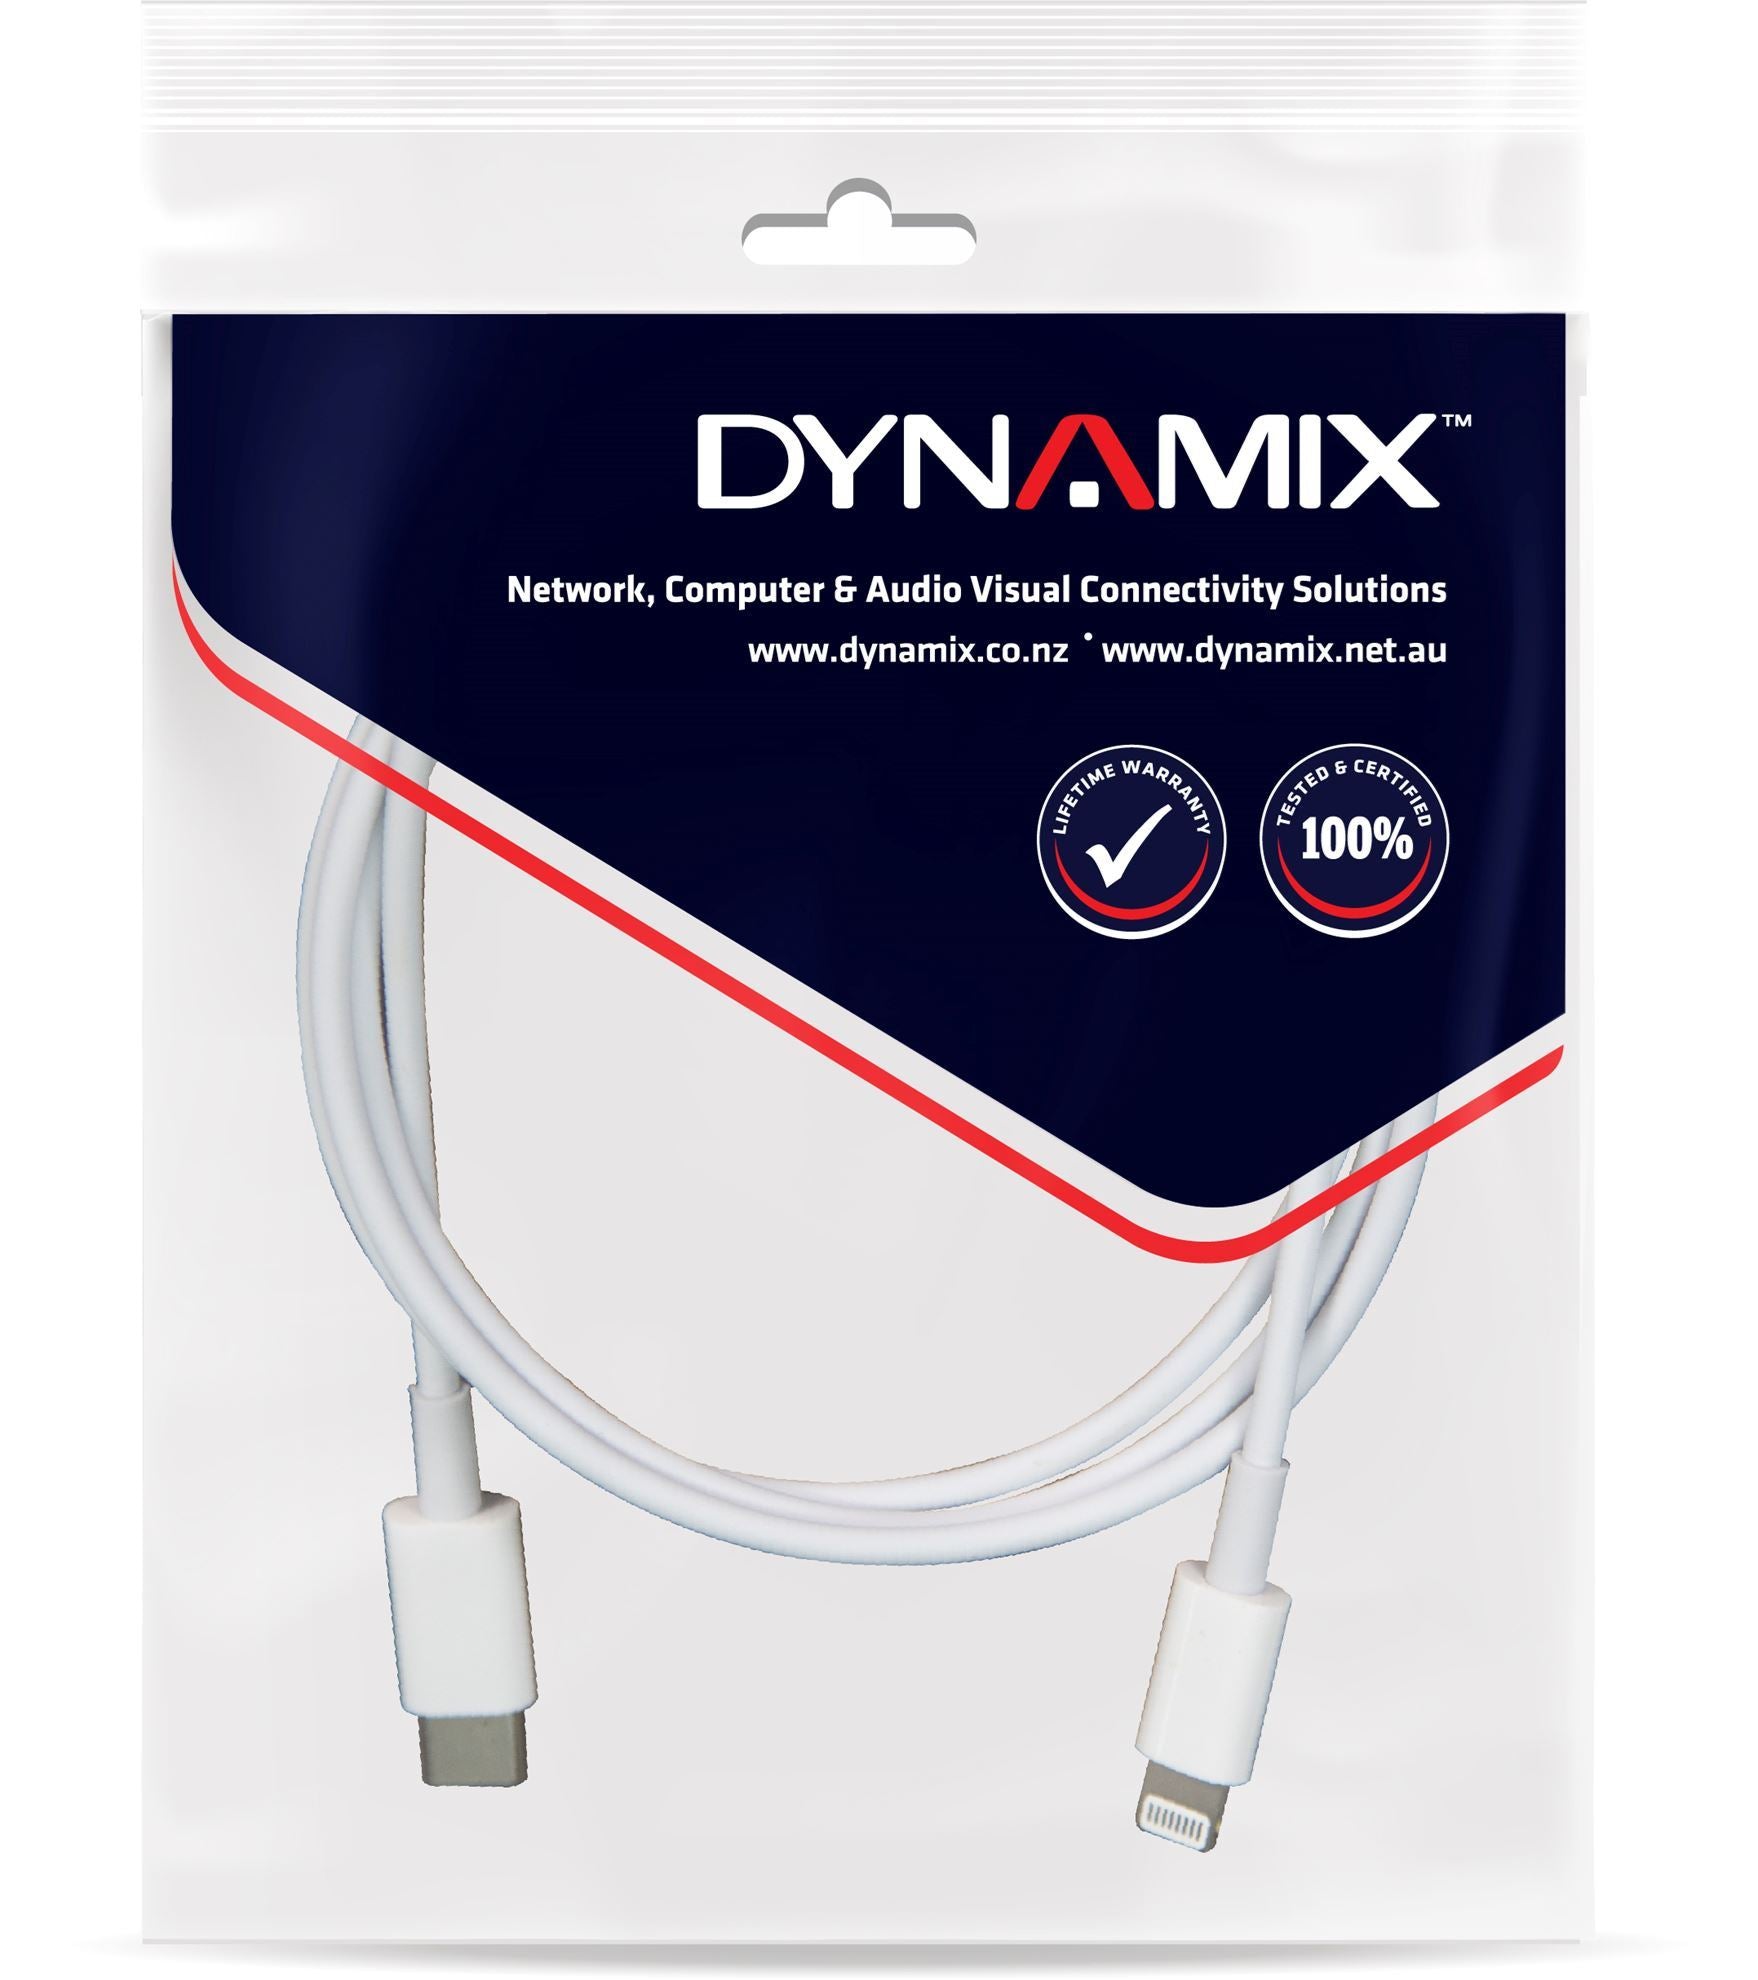 DYNAMIX_1m_USB-C_to_Lightning_Charge_&_Sync_Cable._For_Apple_iPhone,_iPad,_iPad_mini_&_iPods_*Not_MFI_Certified* 934